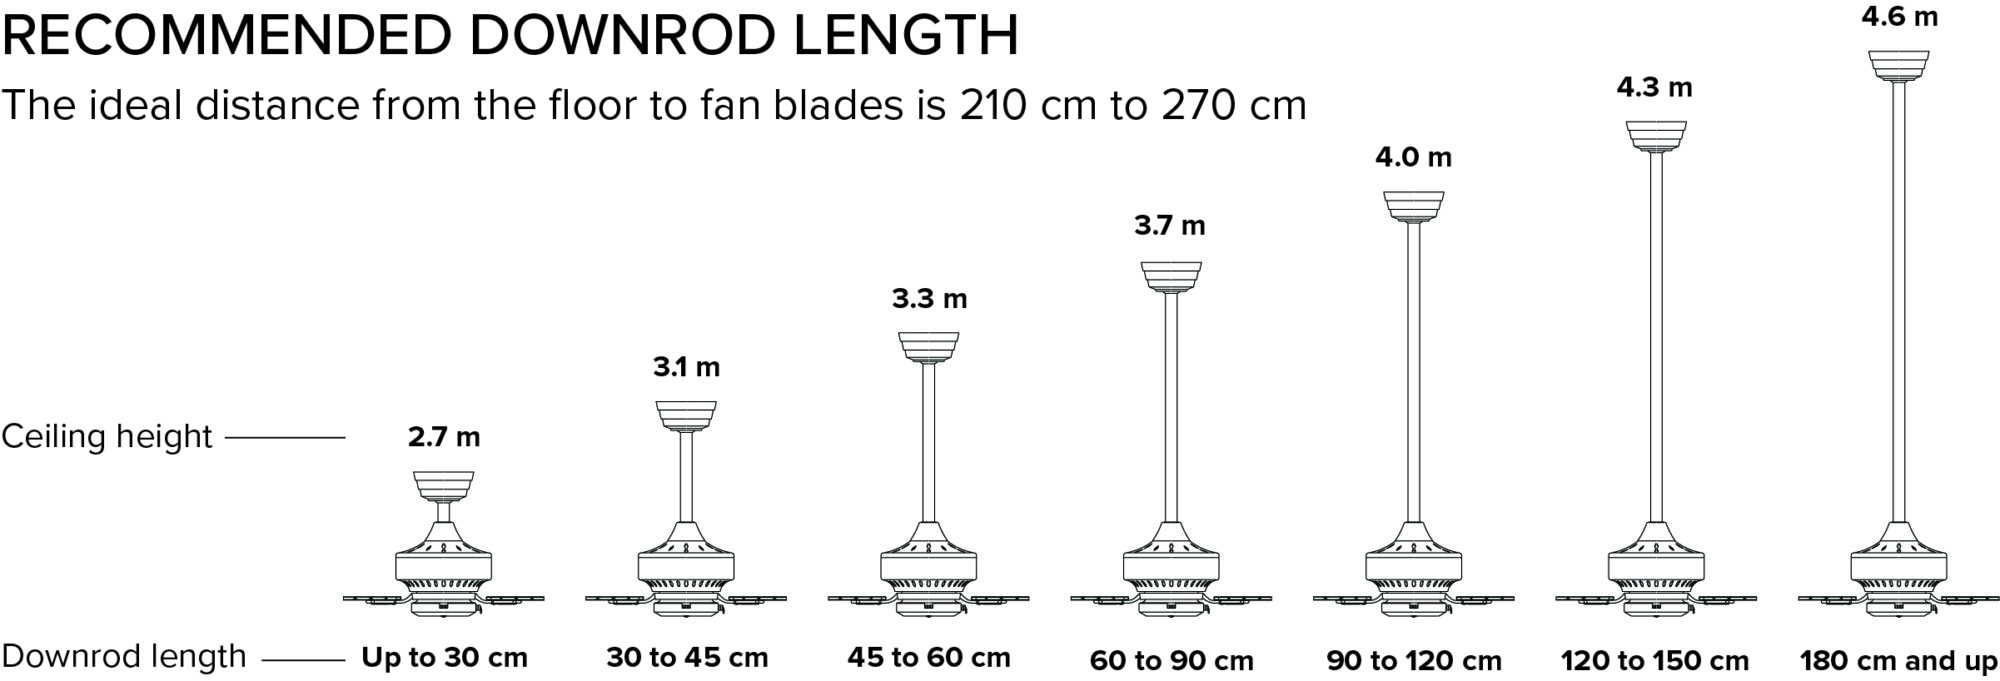 Downrod Length Based on Ceiling Height Guide